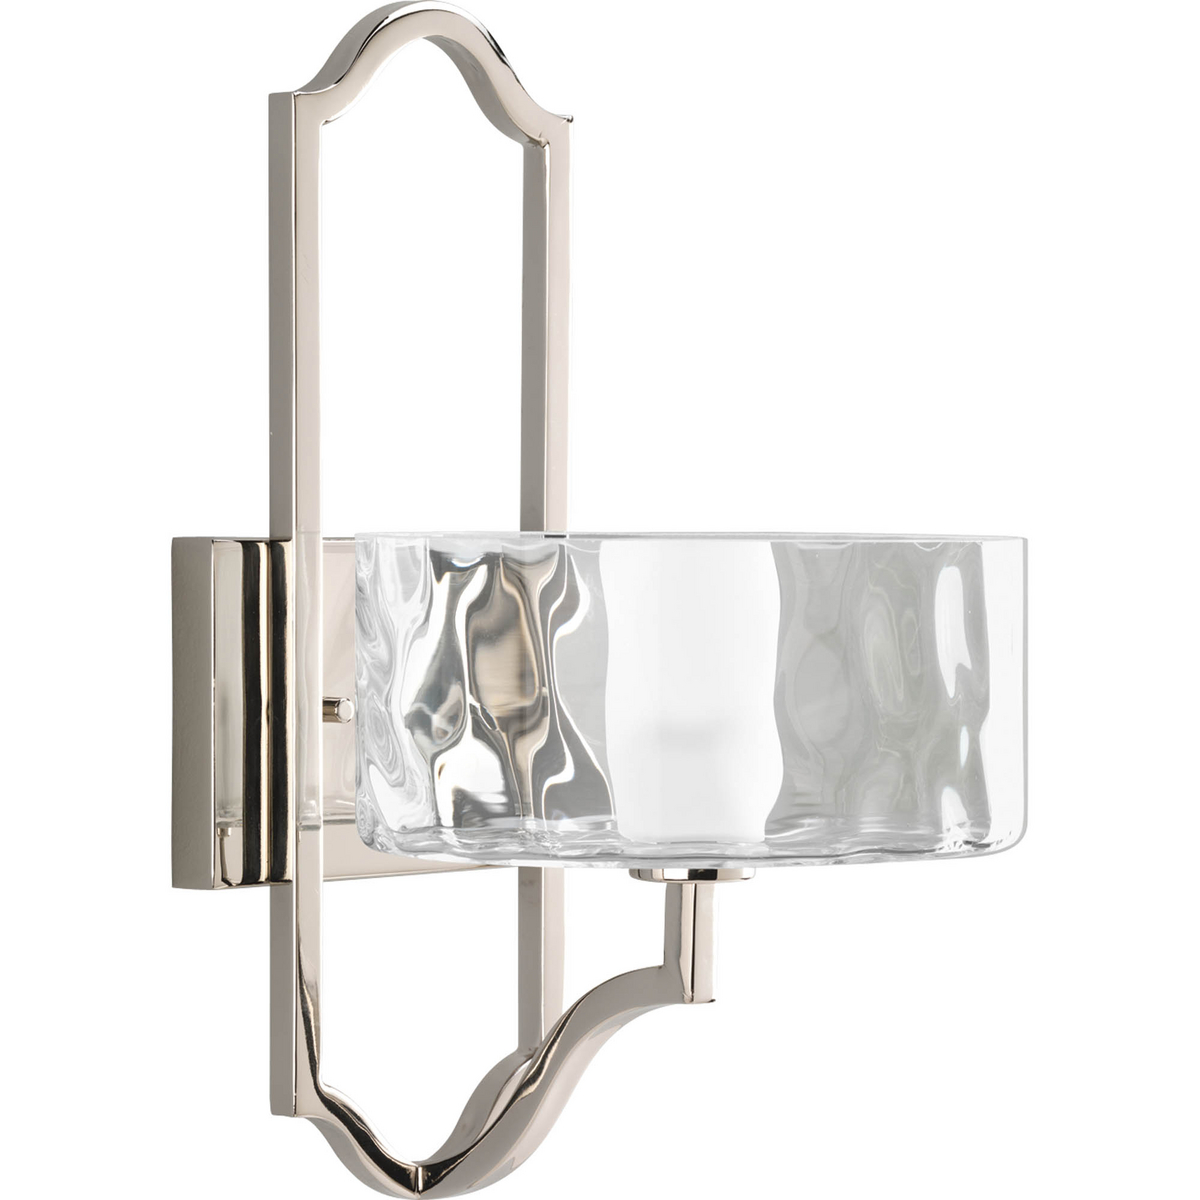 One-light wall sconce. Caress features a chic, sophisticated one-light wall sconce featuring a Polished Nickel metal frame with layered glass diffusers to cast a glimmering light. An outer shade of clear, water glass adds rich texture and playful reflections from a central etched glass diffuser.